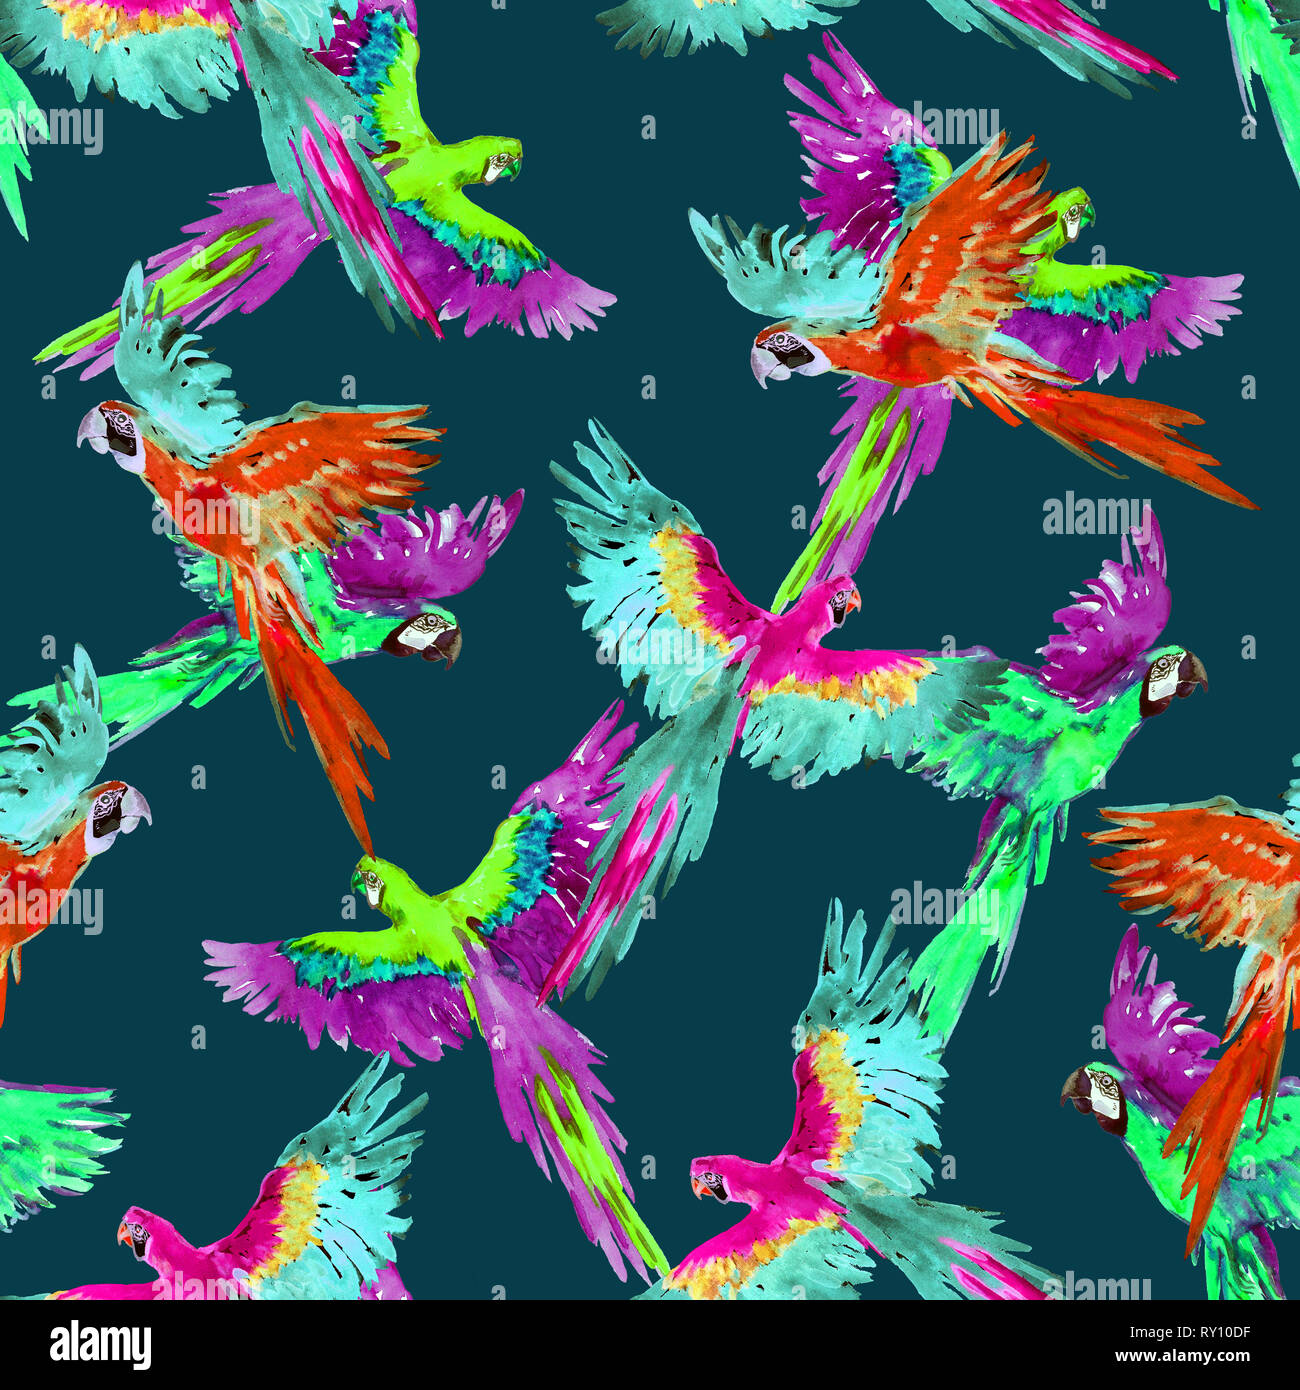 Blue and yellow and Scarlet macaw flying, seamless pattern design, hand painted watercolor illustration, dark green background Stock Photo